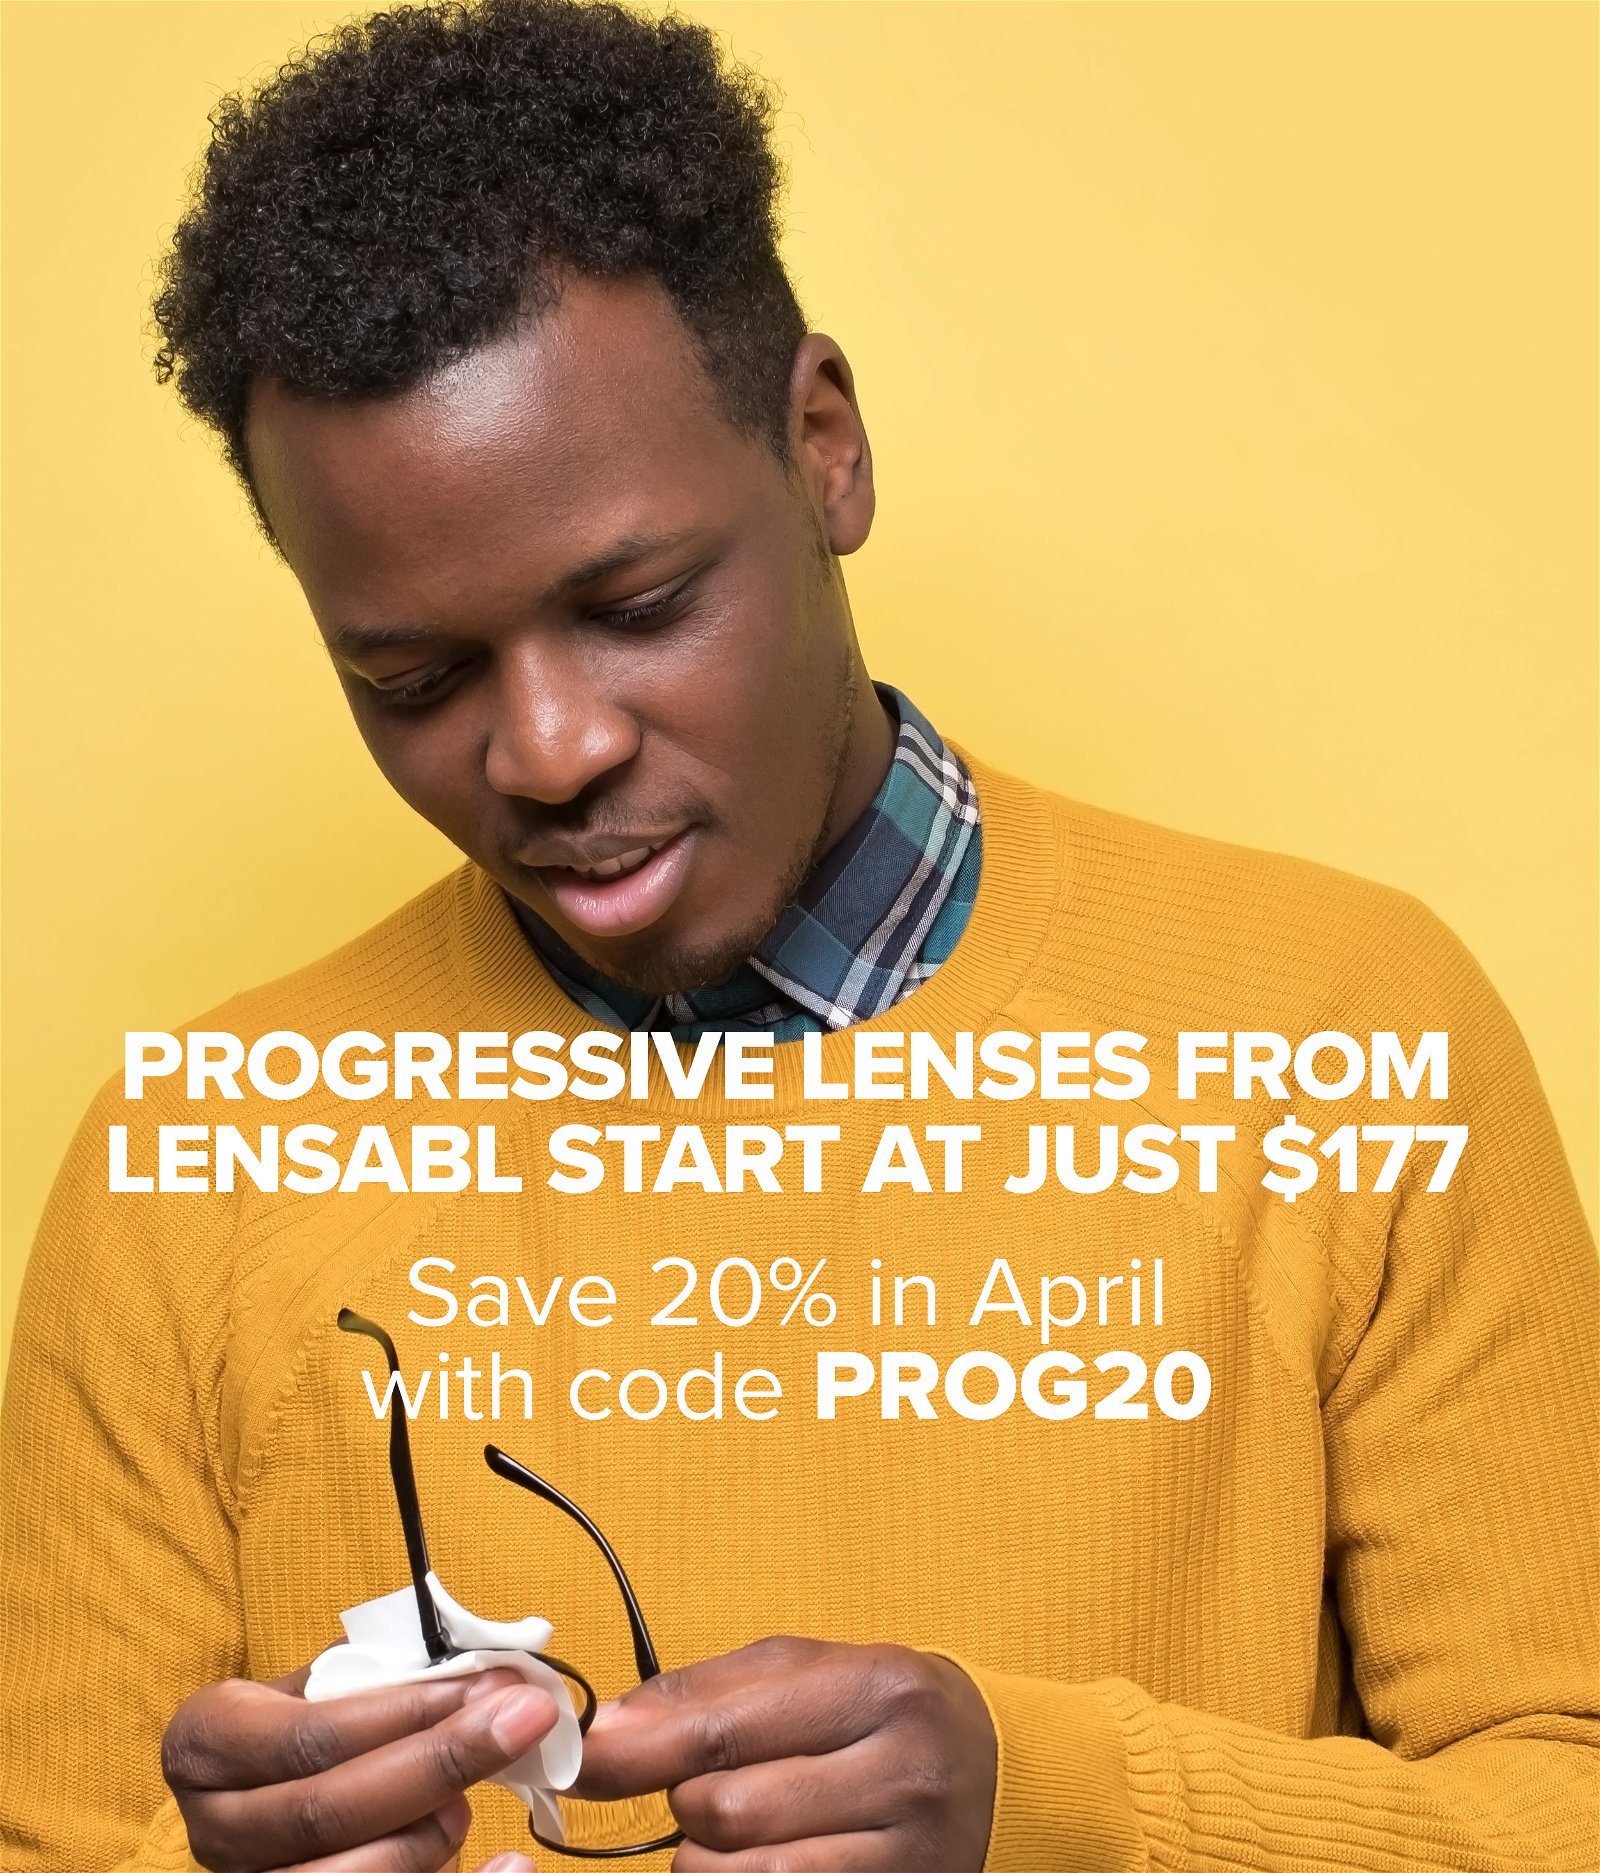 Progressive lenses from Lensabl start at just \\$177and save an additional 20% in April with code PROG20